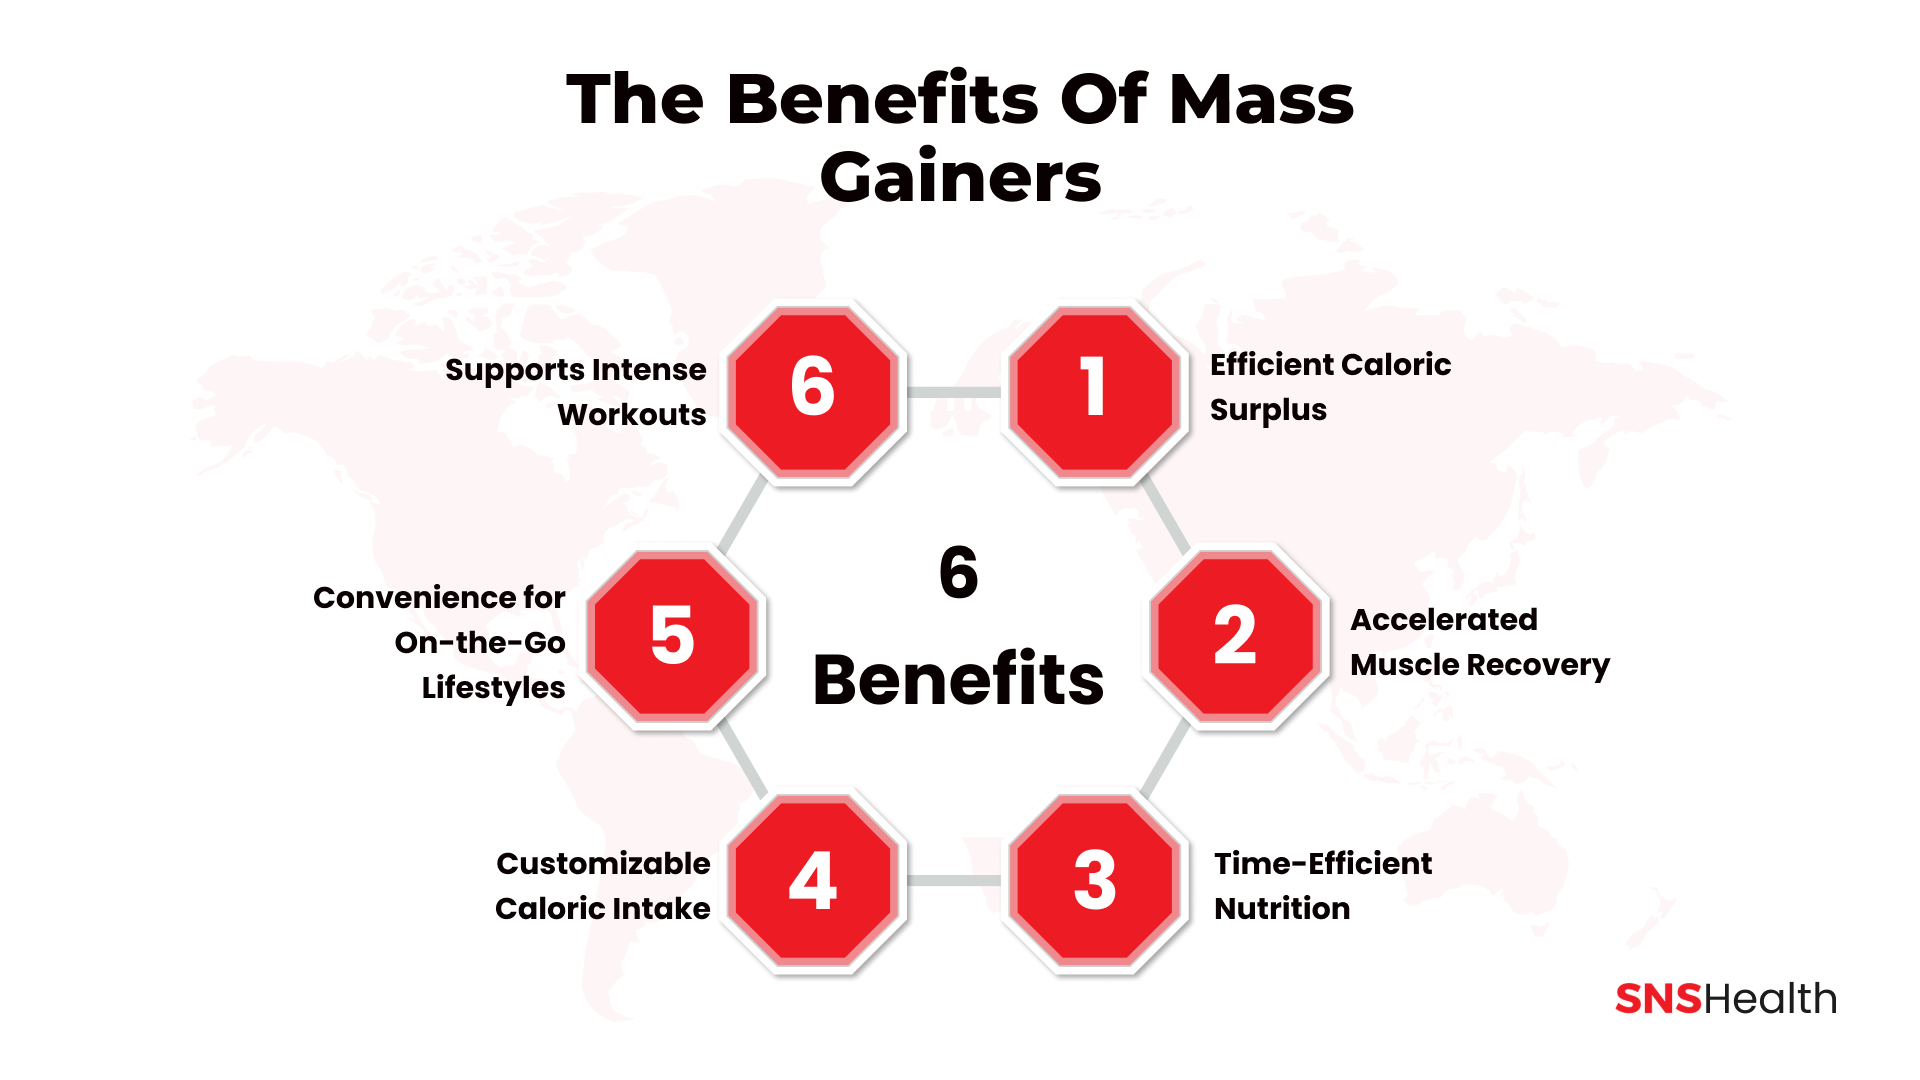 Benefits of Mass Gainers